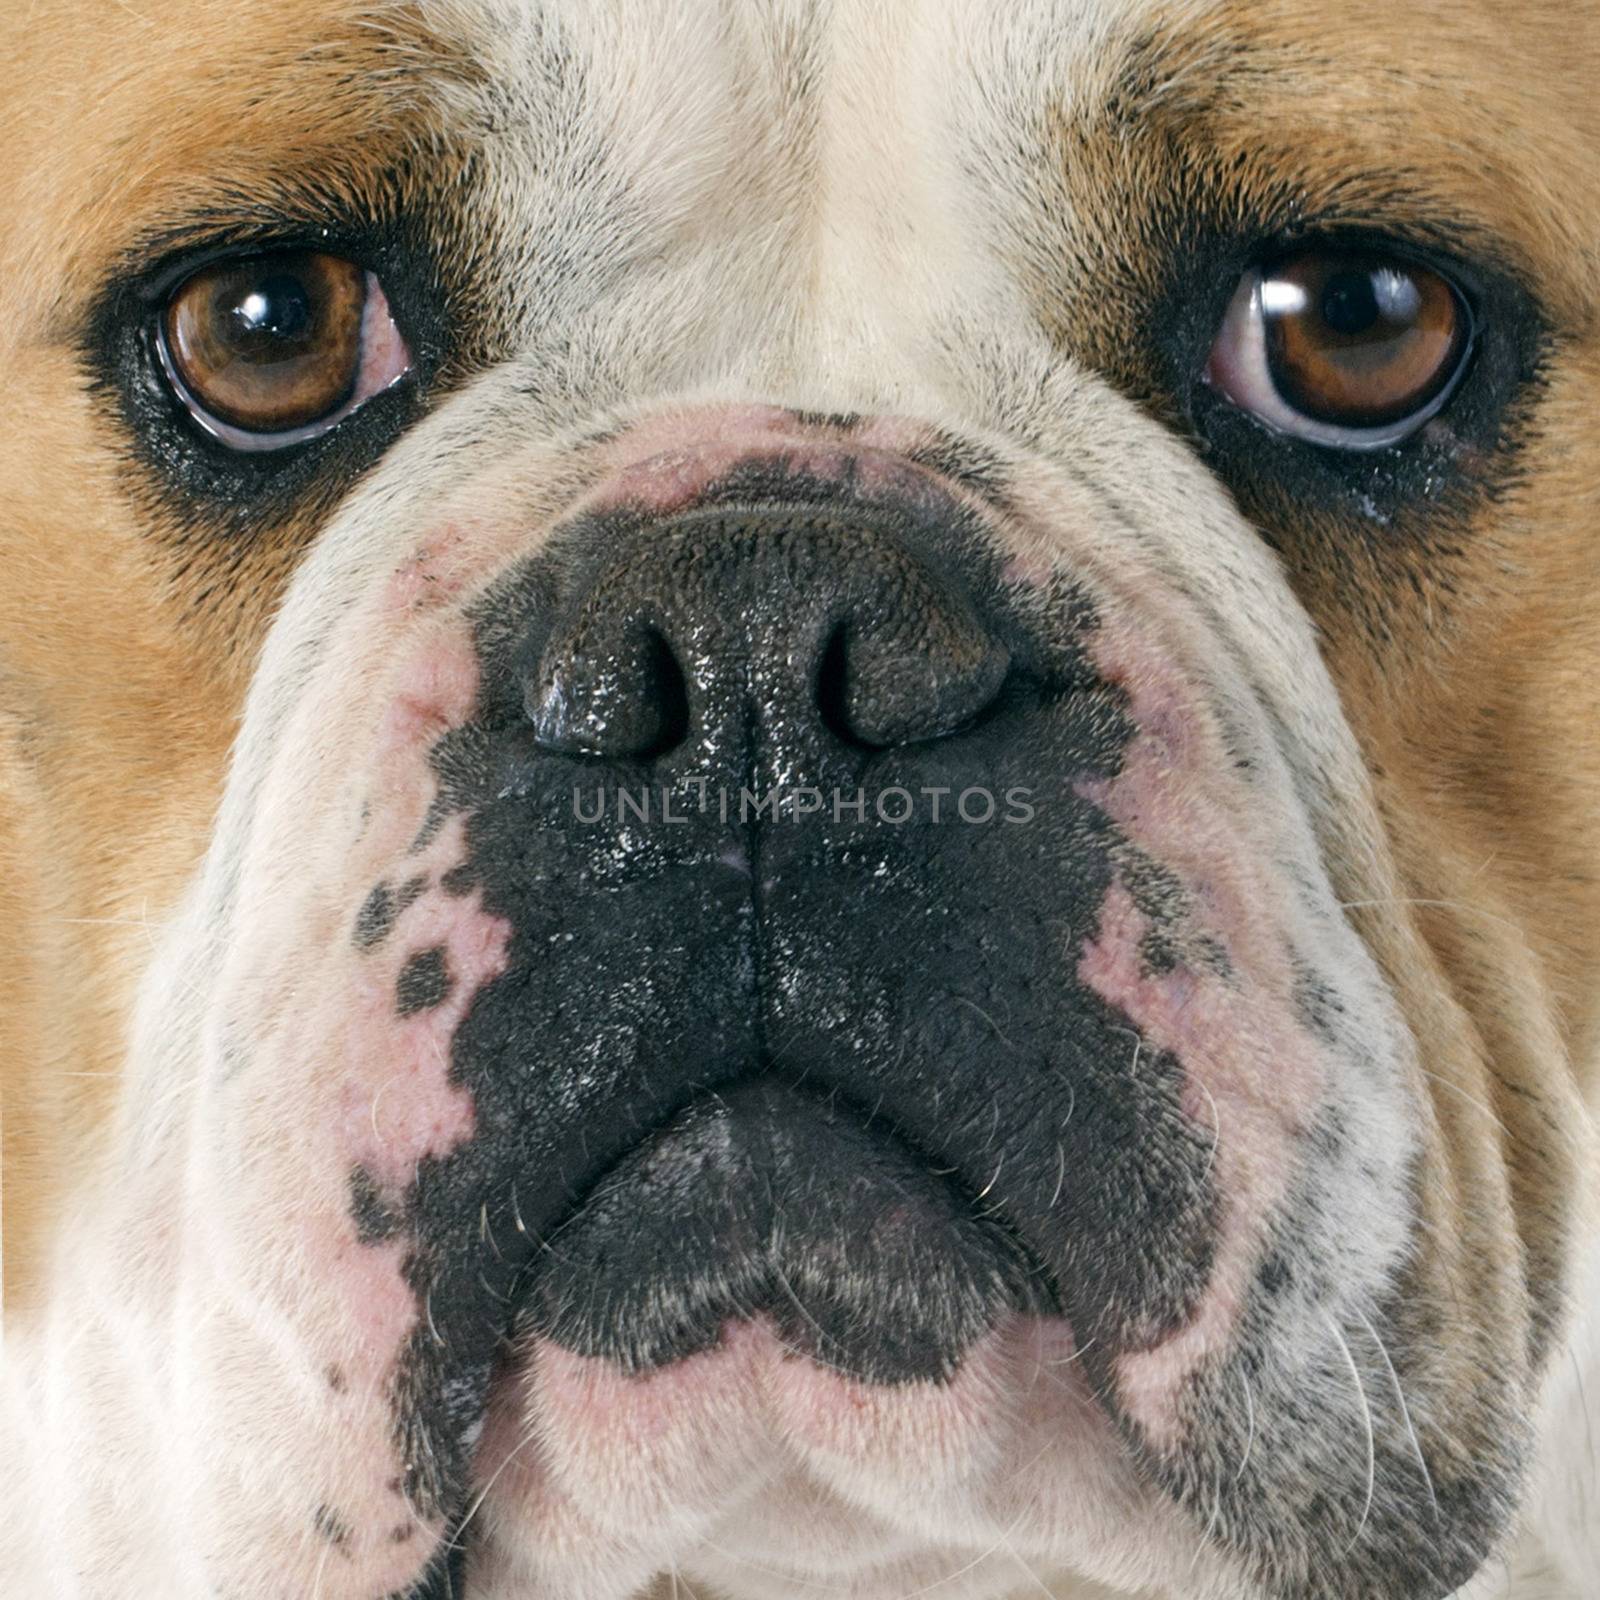 portrait of a purebred english bulldog in front of white background